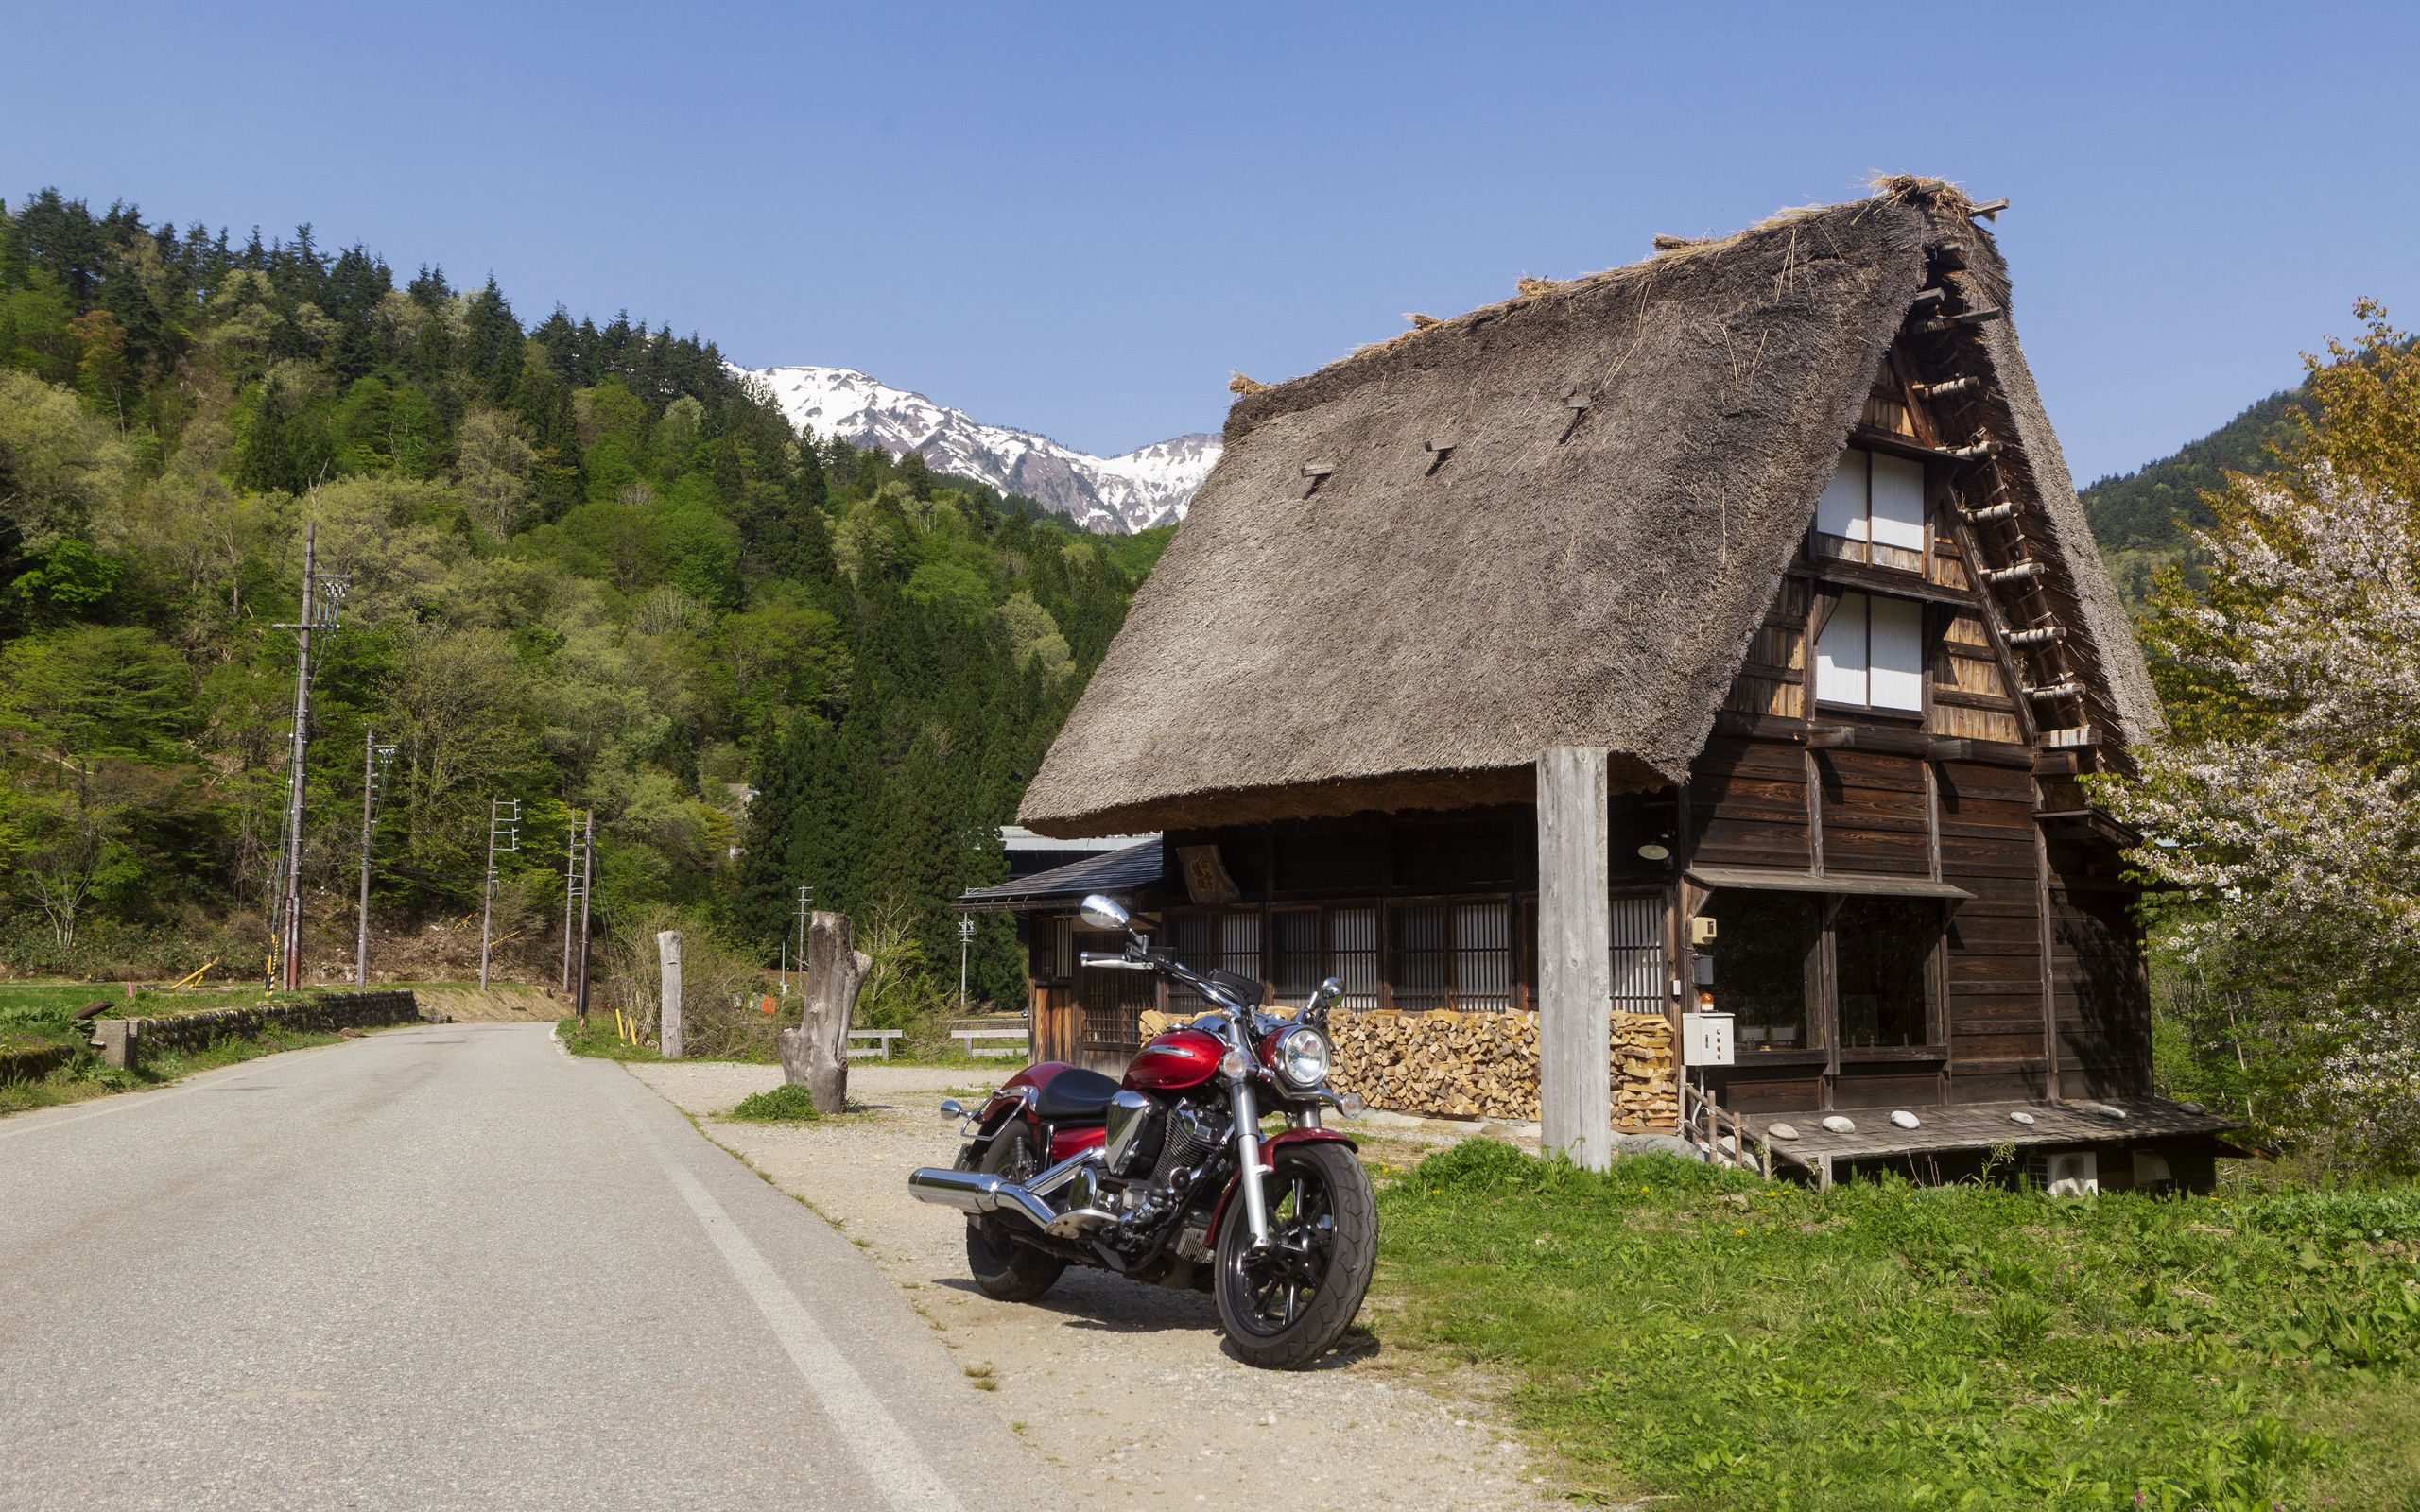 2560x1600 Wallpaper motorcycle, red, house, trees, mountain